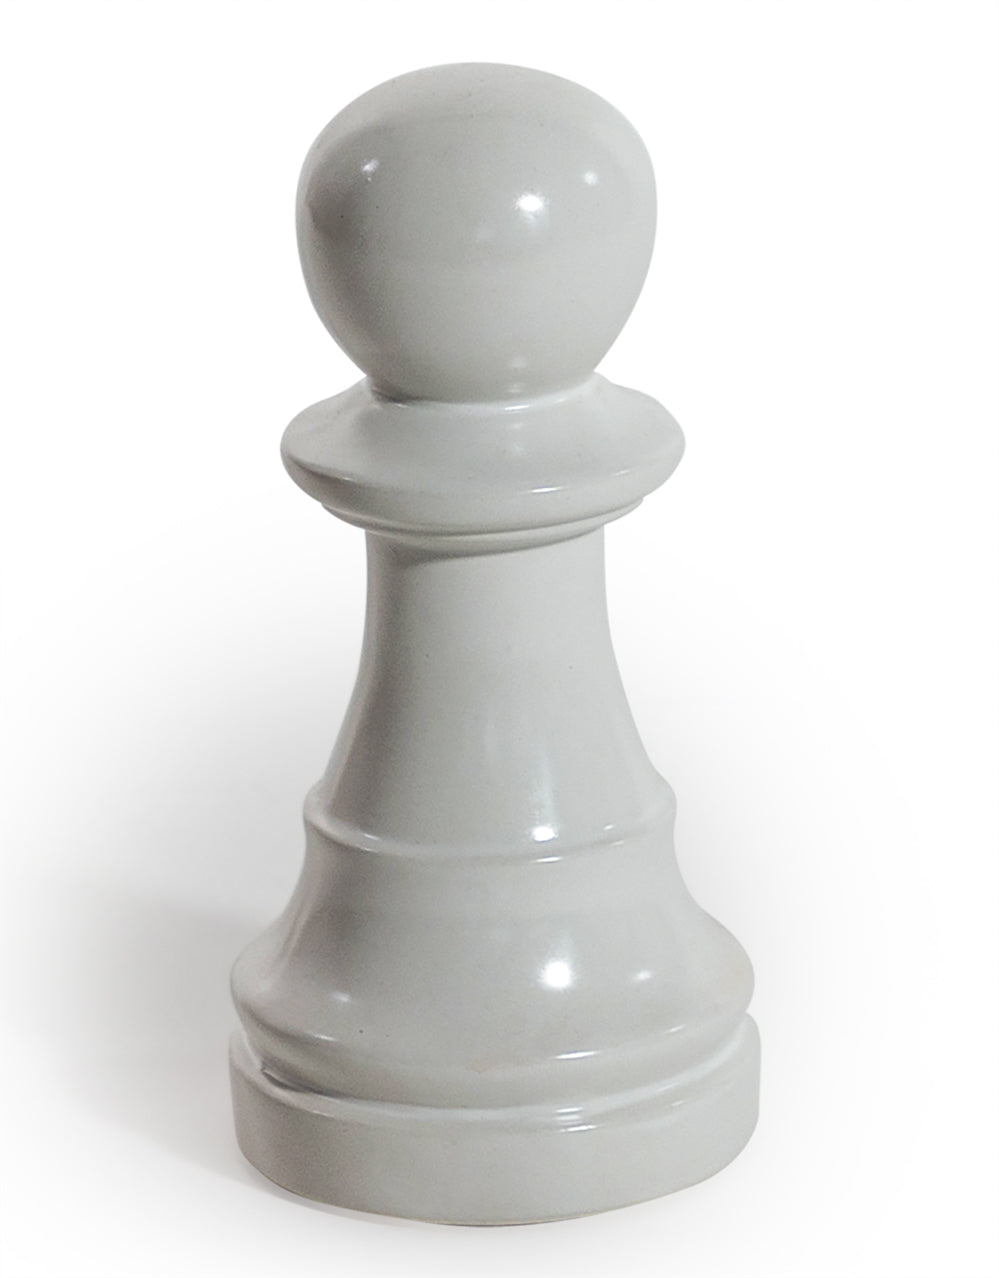 Pawn Chess Piece Ornament